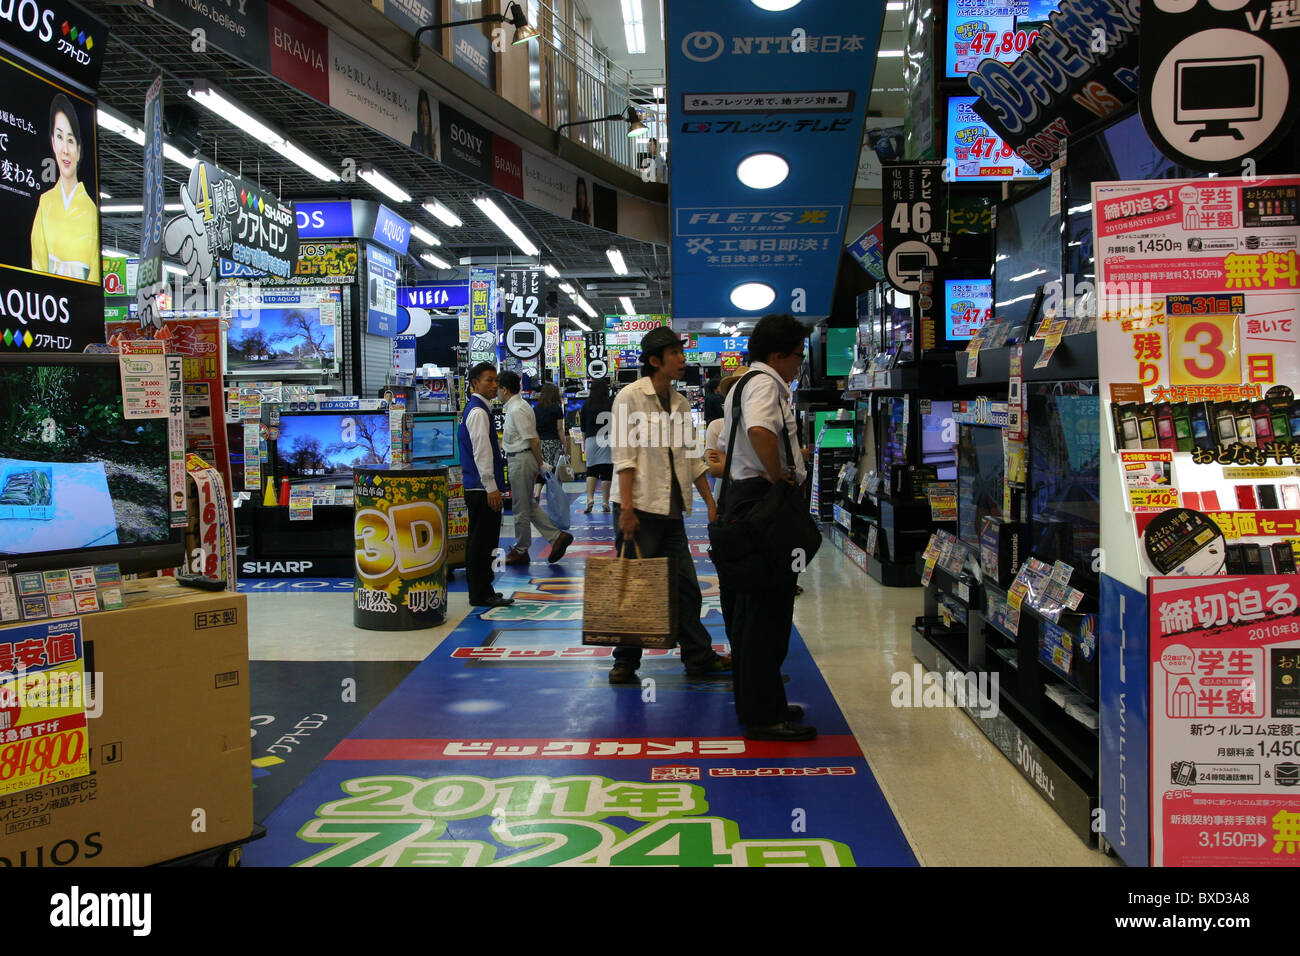 TVs and other electronics for sale in Bic Camera store in Tokyo Japan 2010 Stock Photo